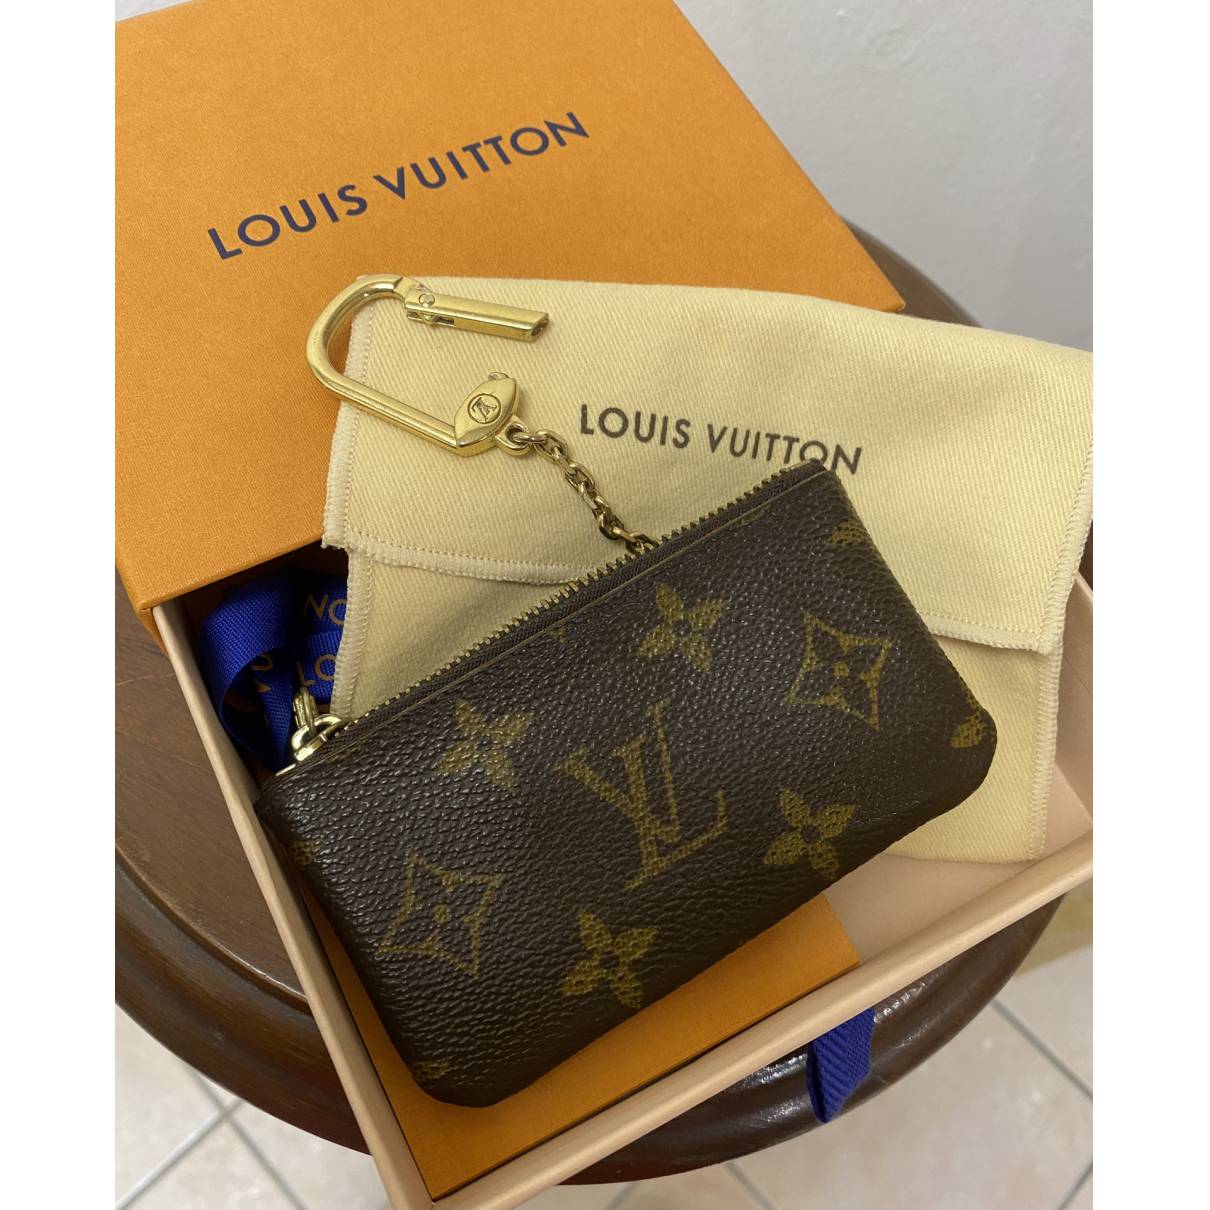 Louis Vuitton - Authenticated Purse - Leather Brown for Women, Very Good Condition